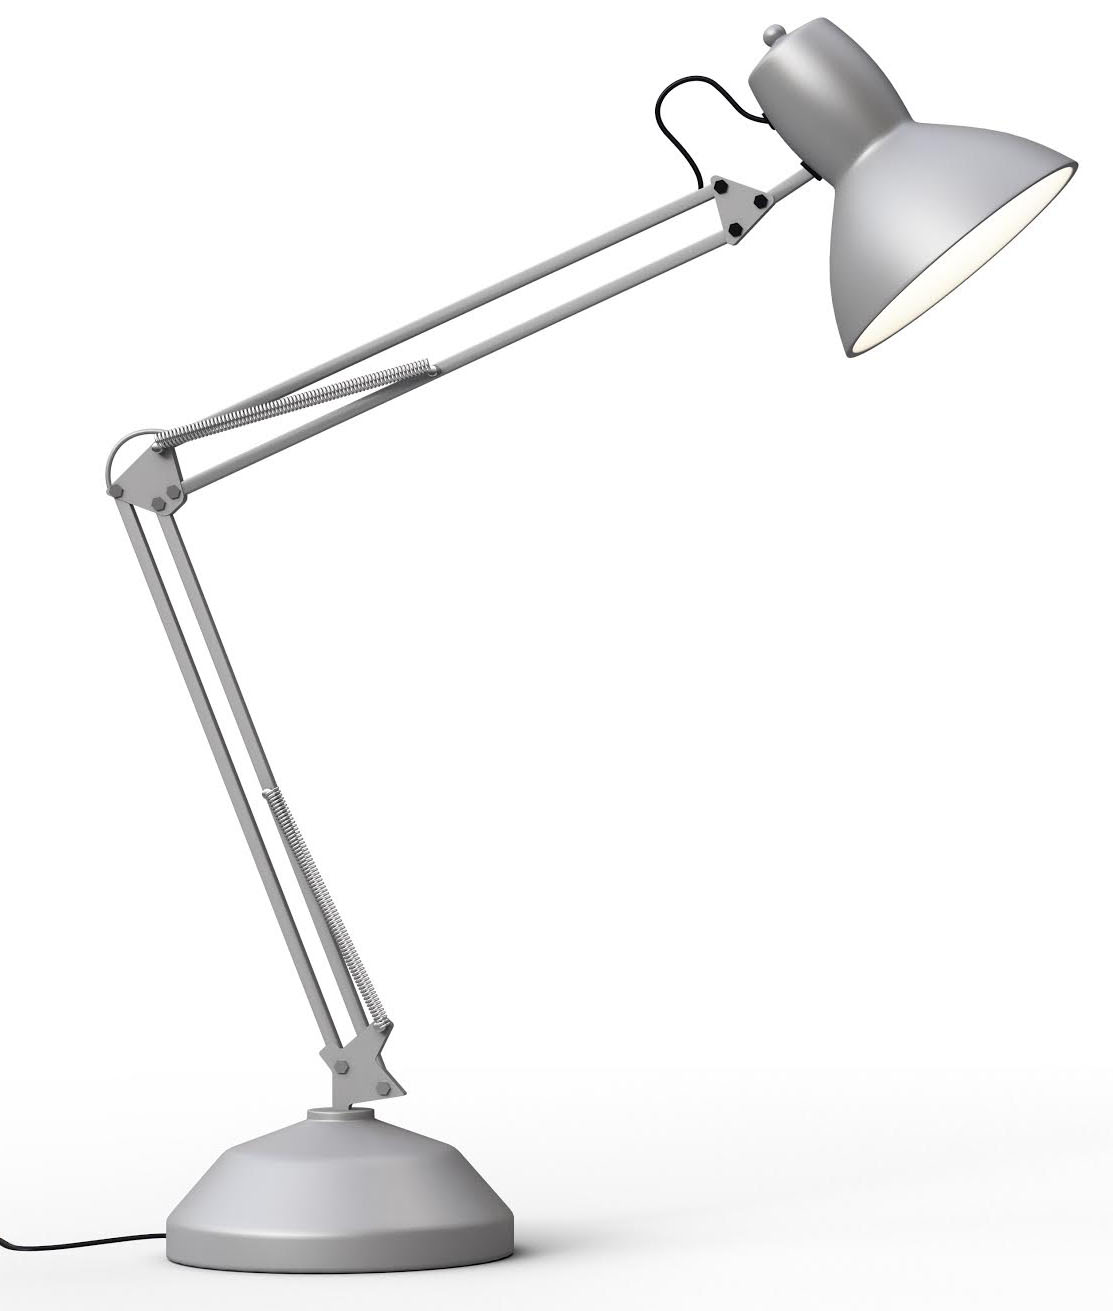 Vintage white desk lamp isolated on gray